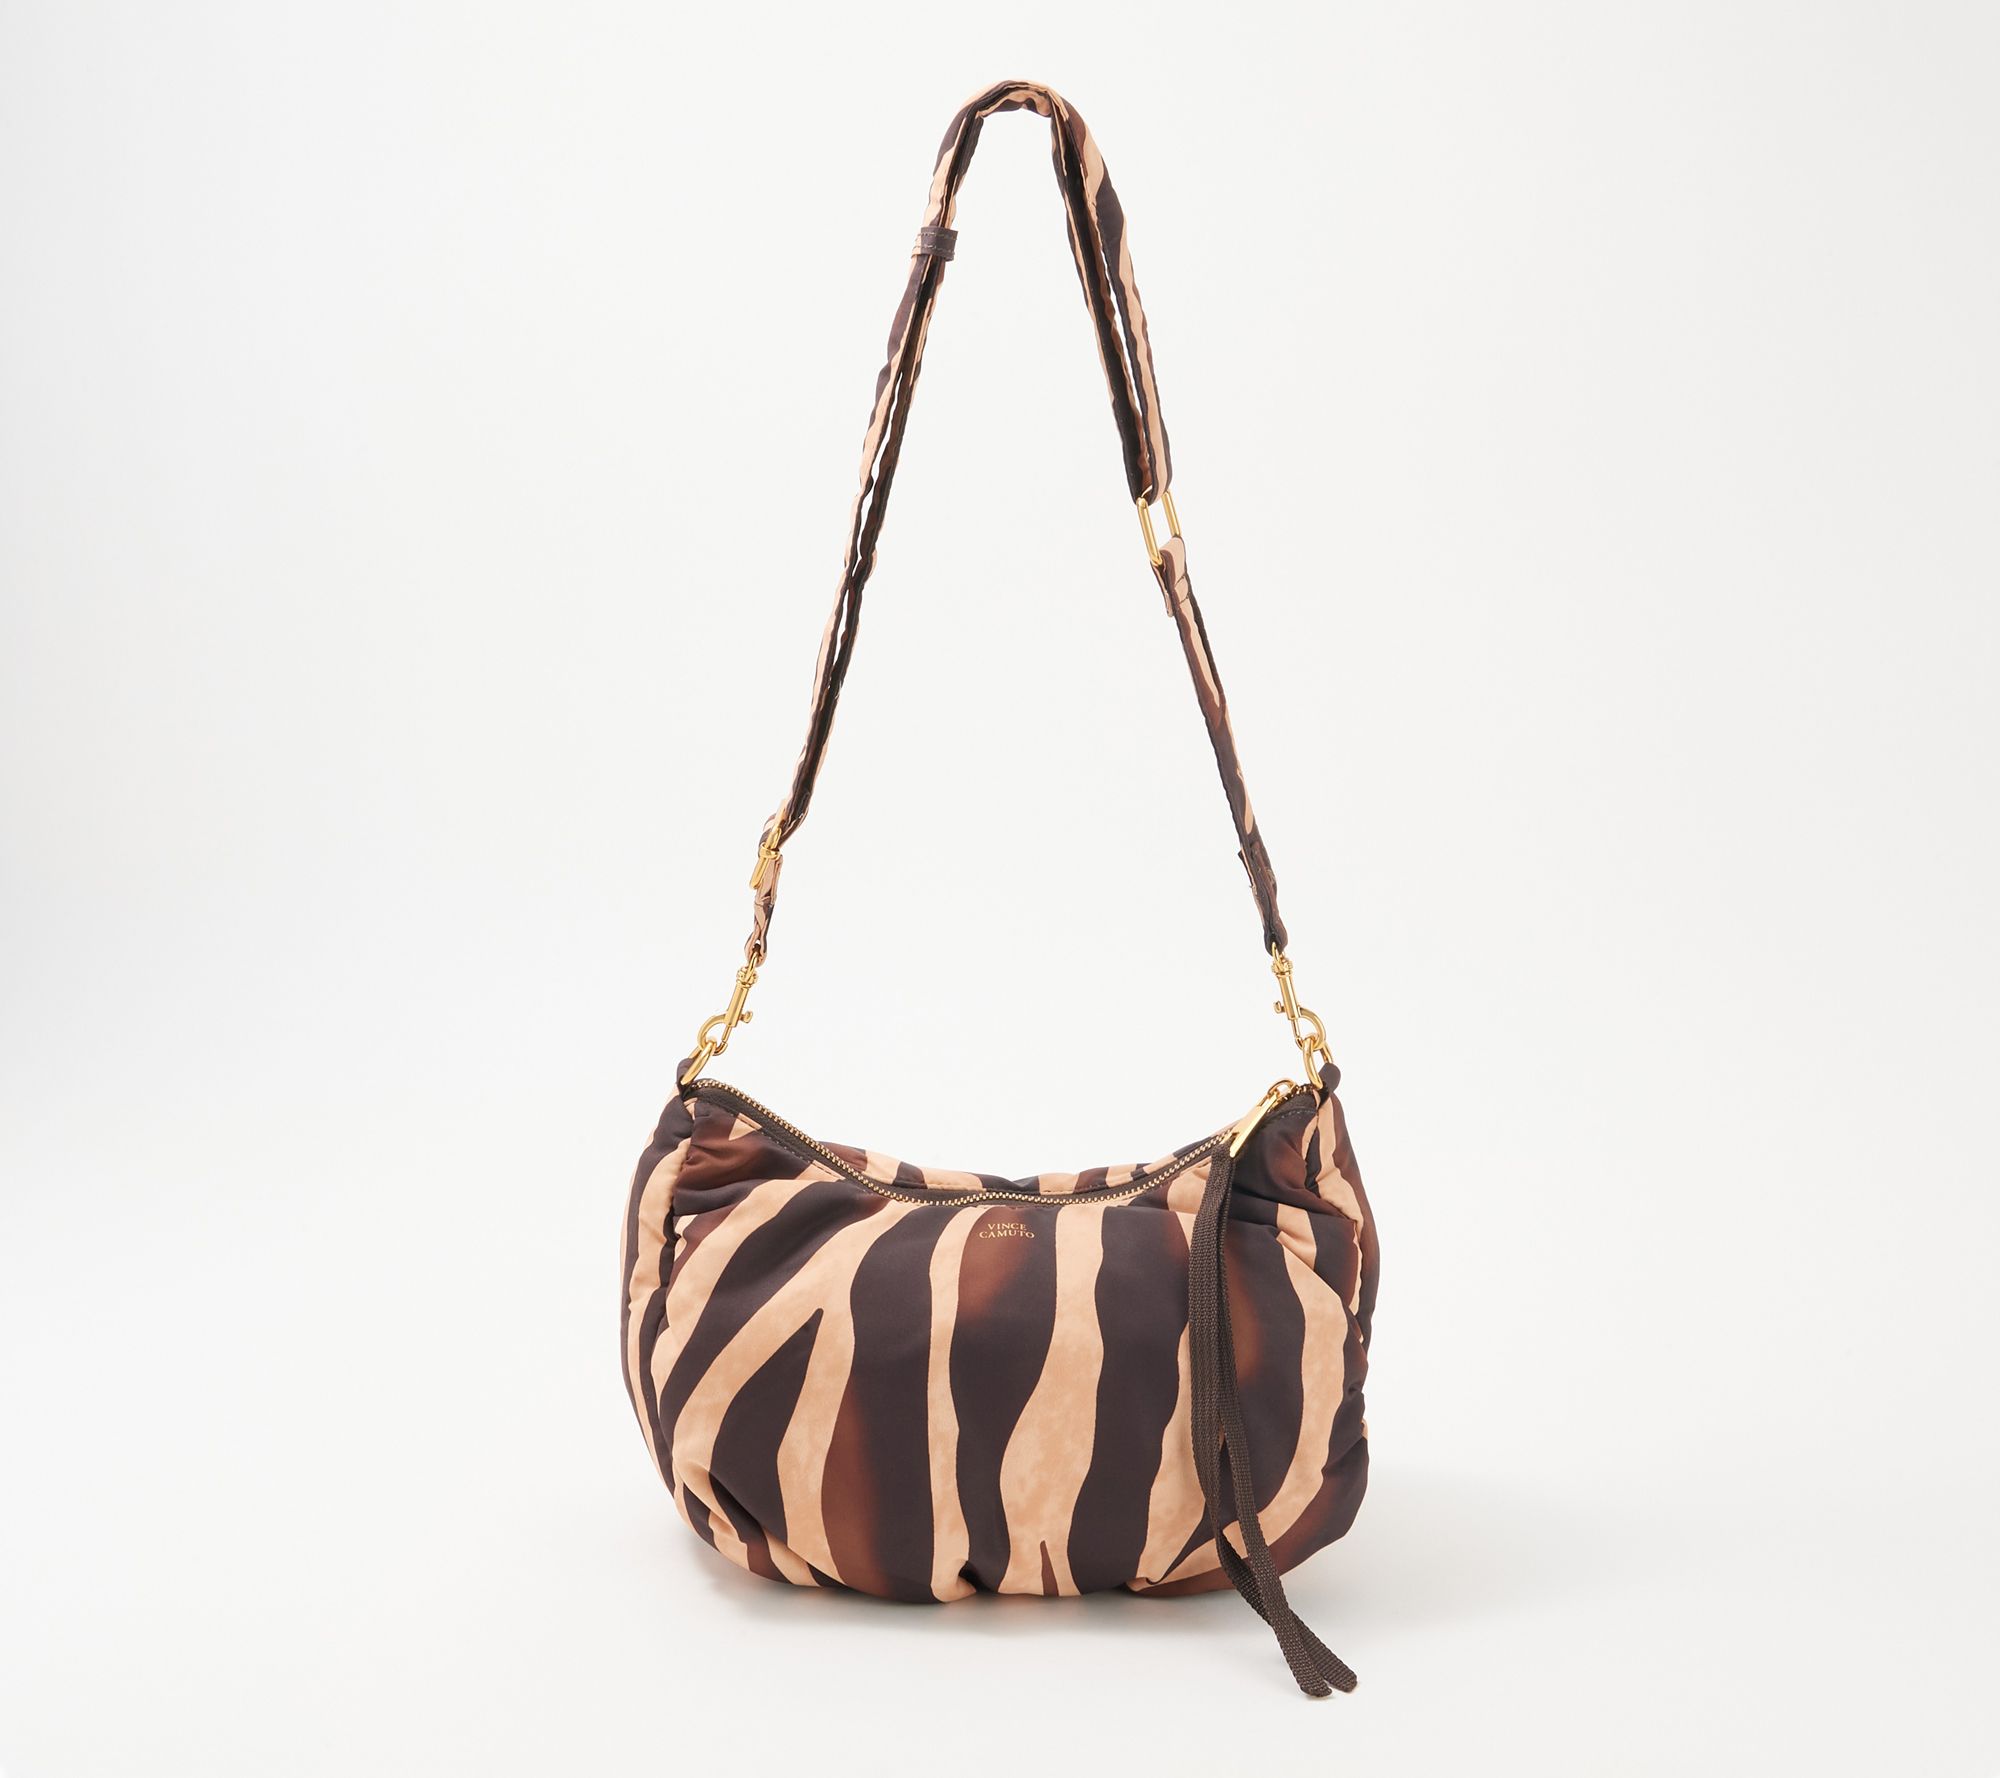 Vince Camuto Leather Bag- Arlow on QVC 